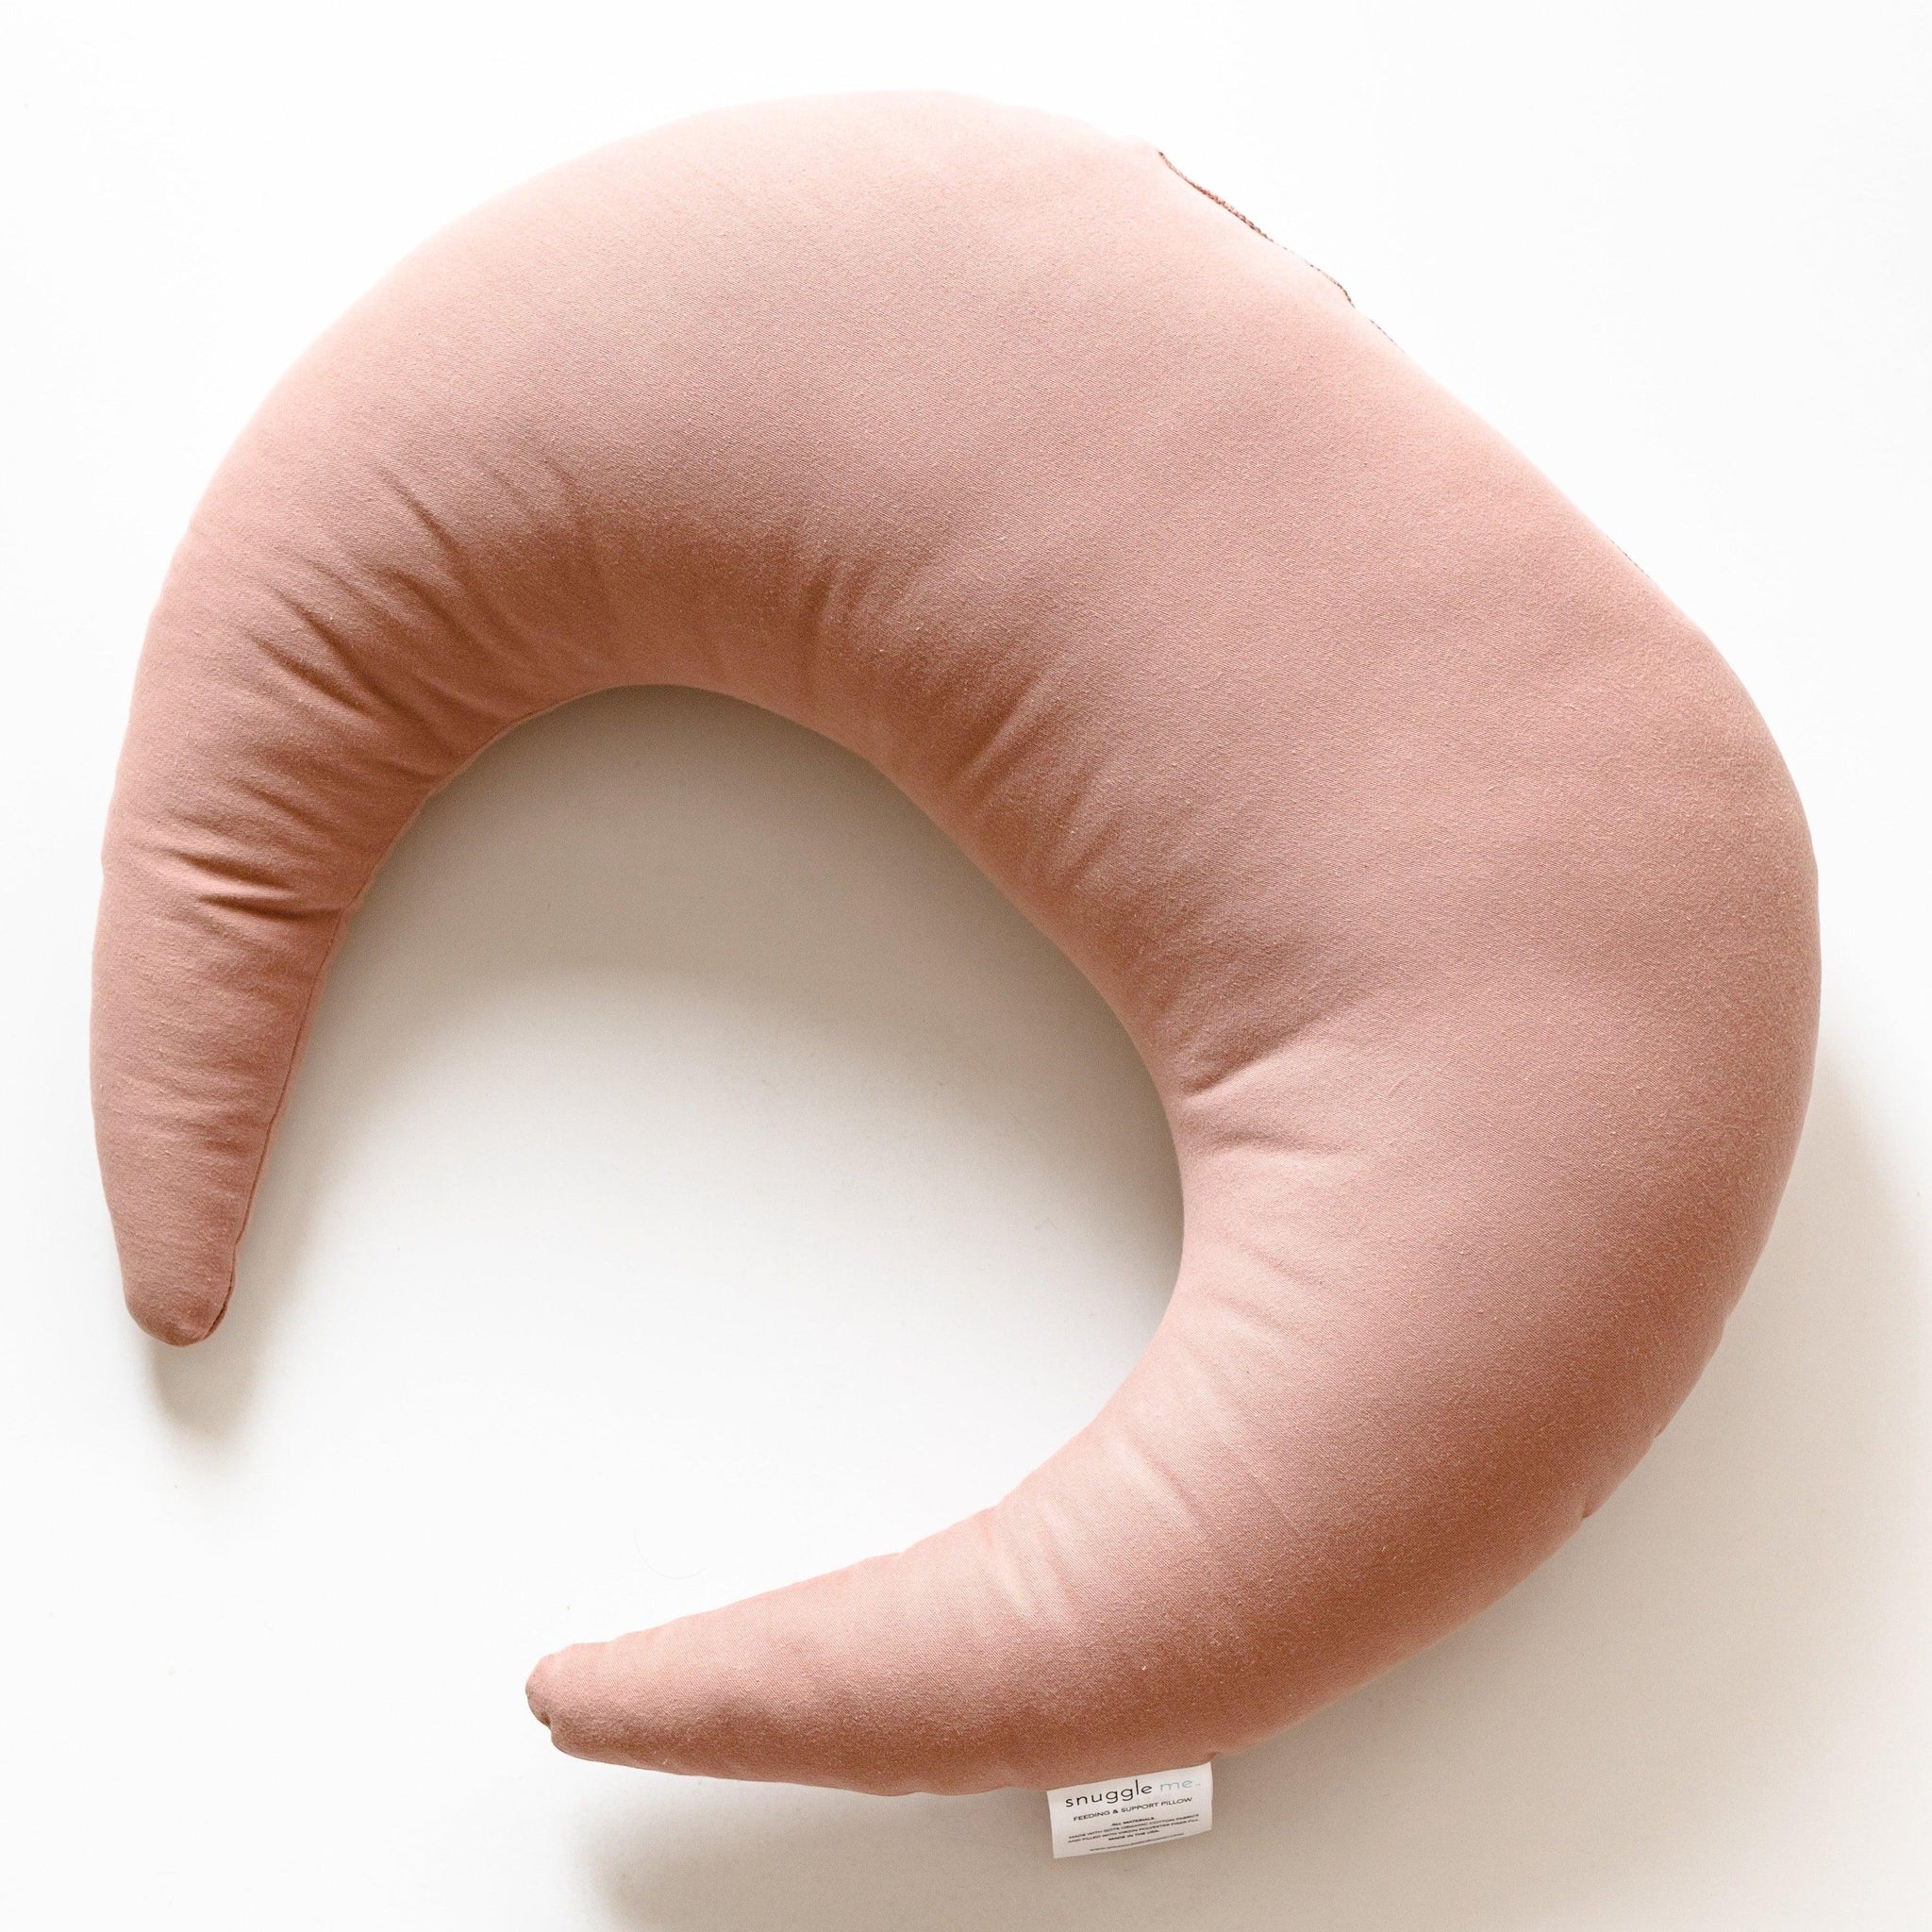 A pink crescent-shaped Feeding & Support Pillow by Gumdrop on a white surface.